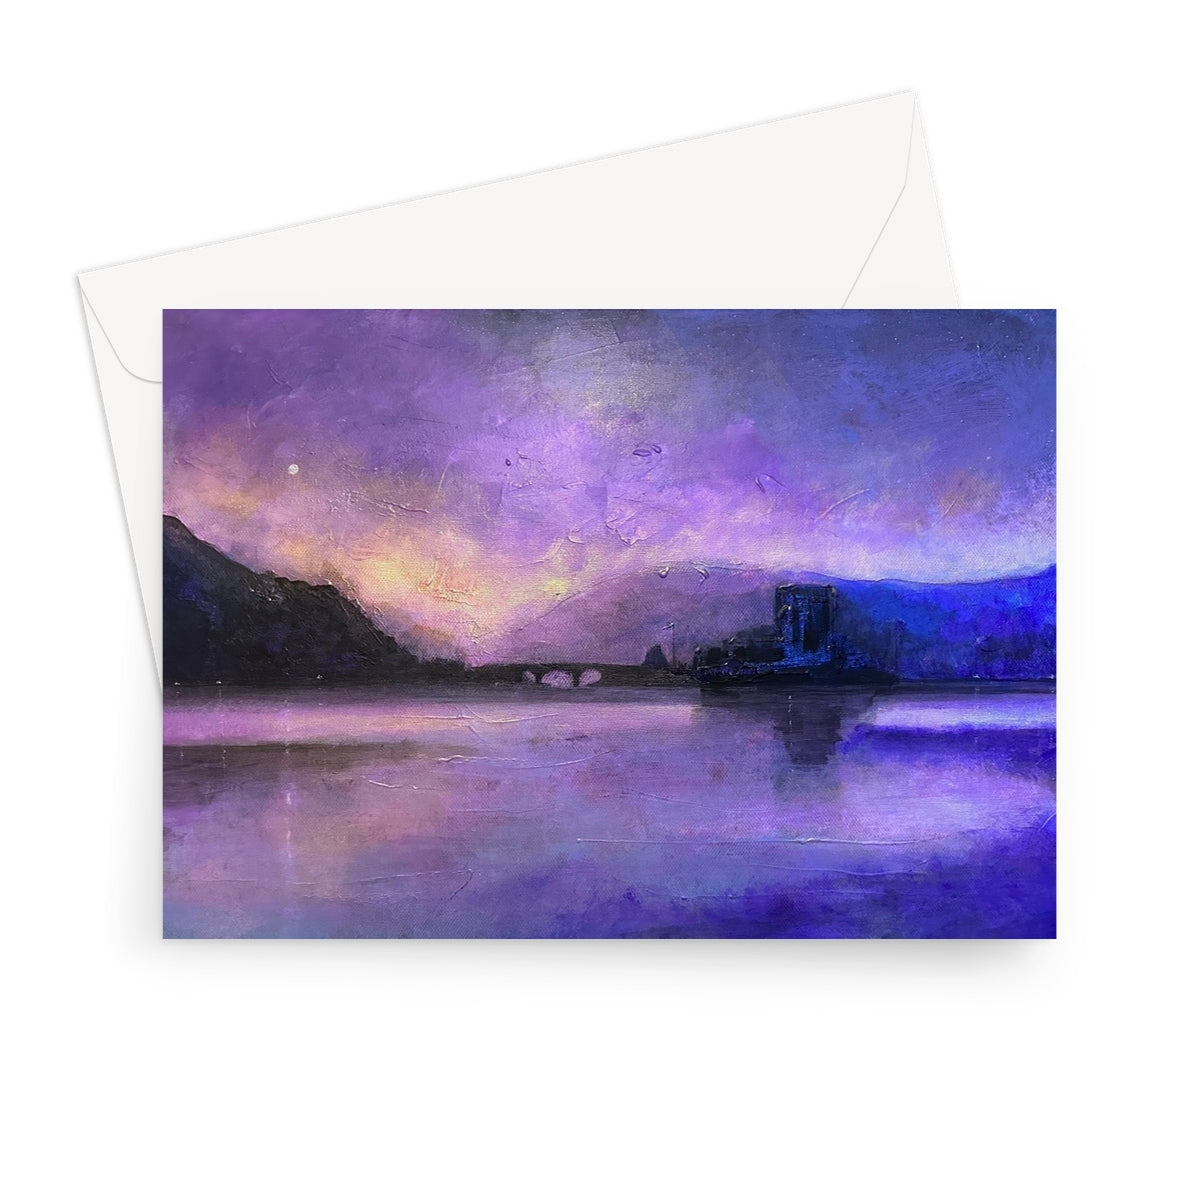 Eilean Donan Castle Moonset Art Gifts Greeting Card-Greetings Cards-Historic & Iconic Scotland Art Gallery-7"x5"-1 Card-Paintings, Prints, Homeware, Art Gifts From Scotland By Scottish Artist Kevin Hunter